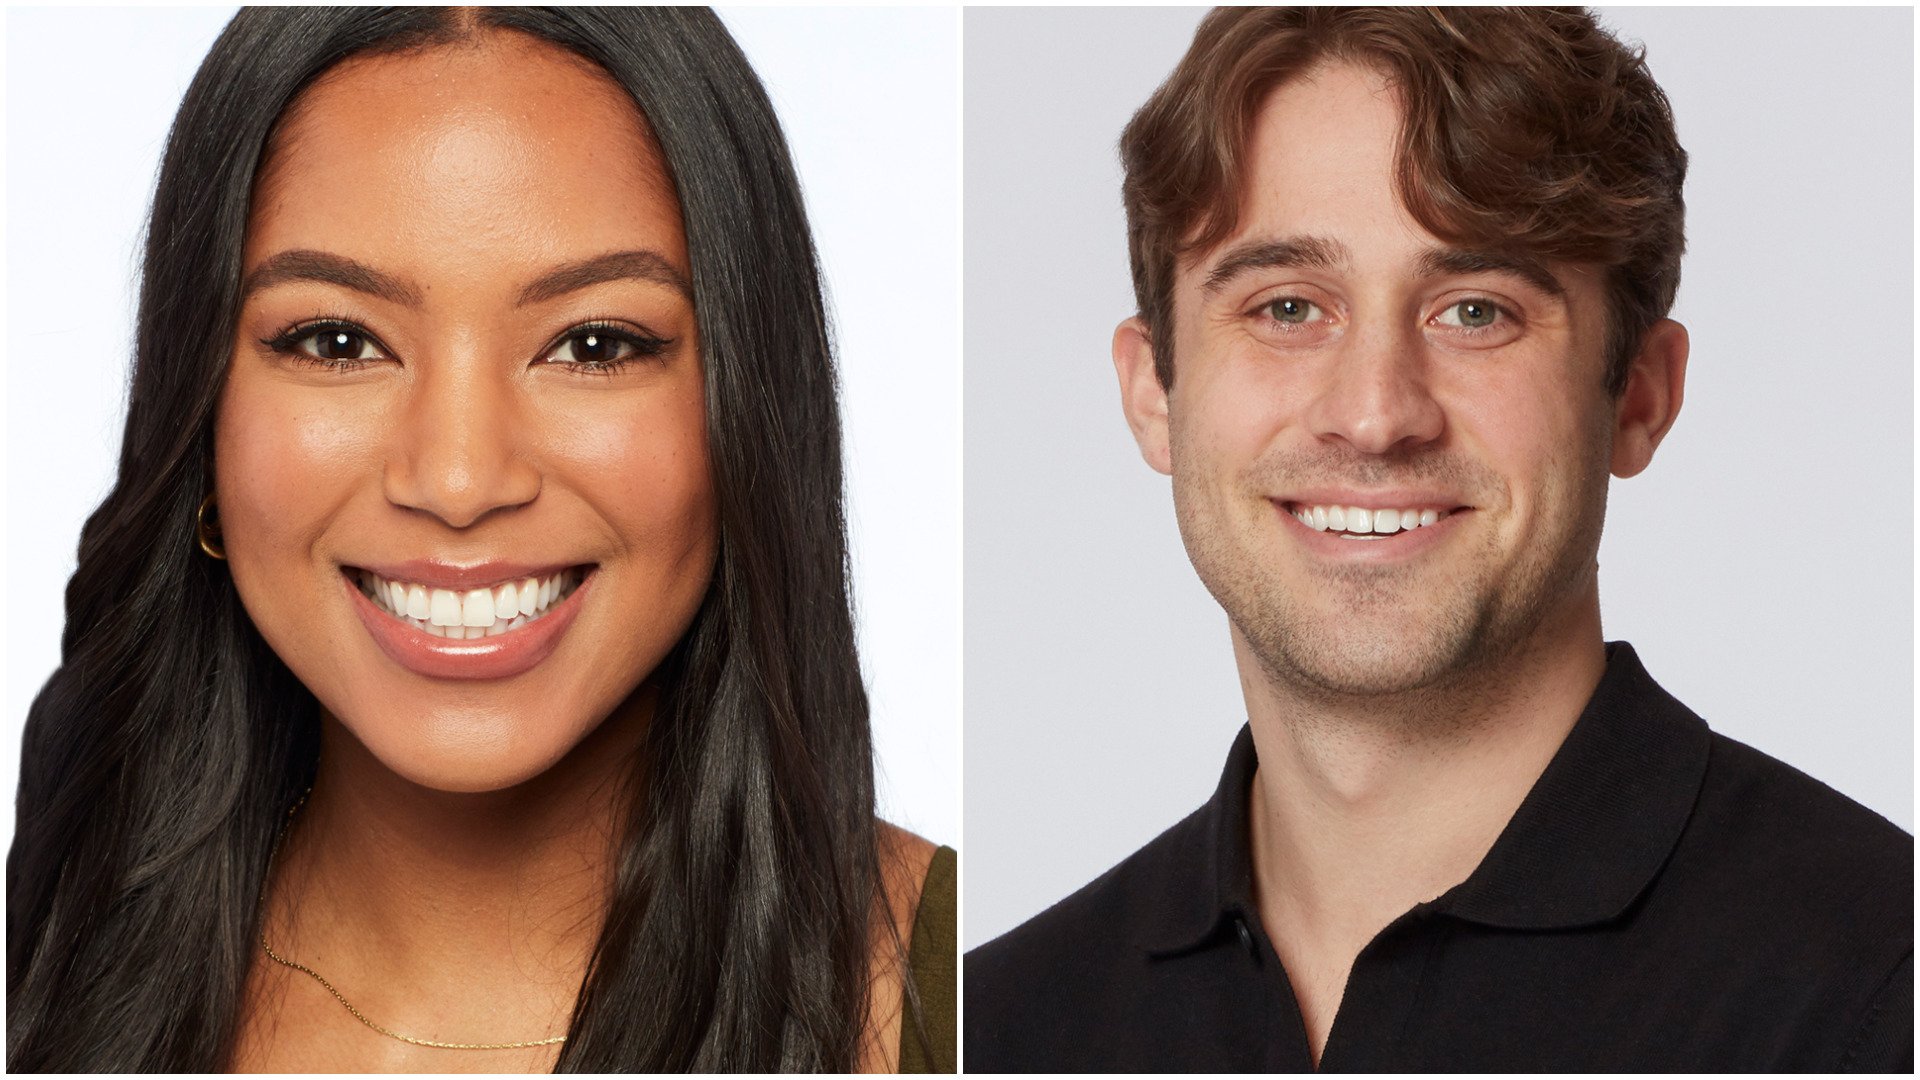 Headshots of Bri Springs from ‘The Bachelor’ and Greg Grippo from ‘The Bachelorette’ in 2021